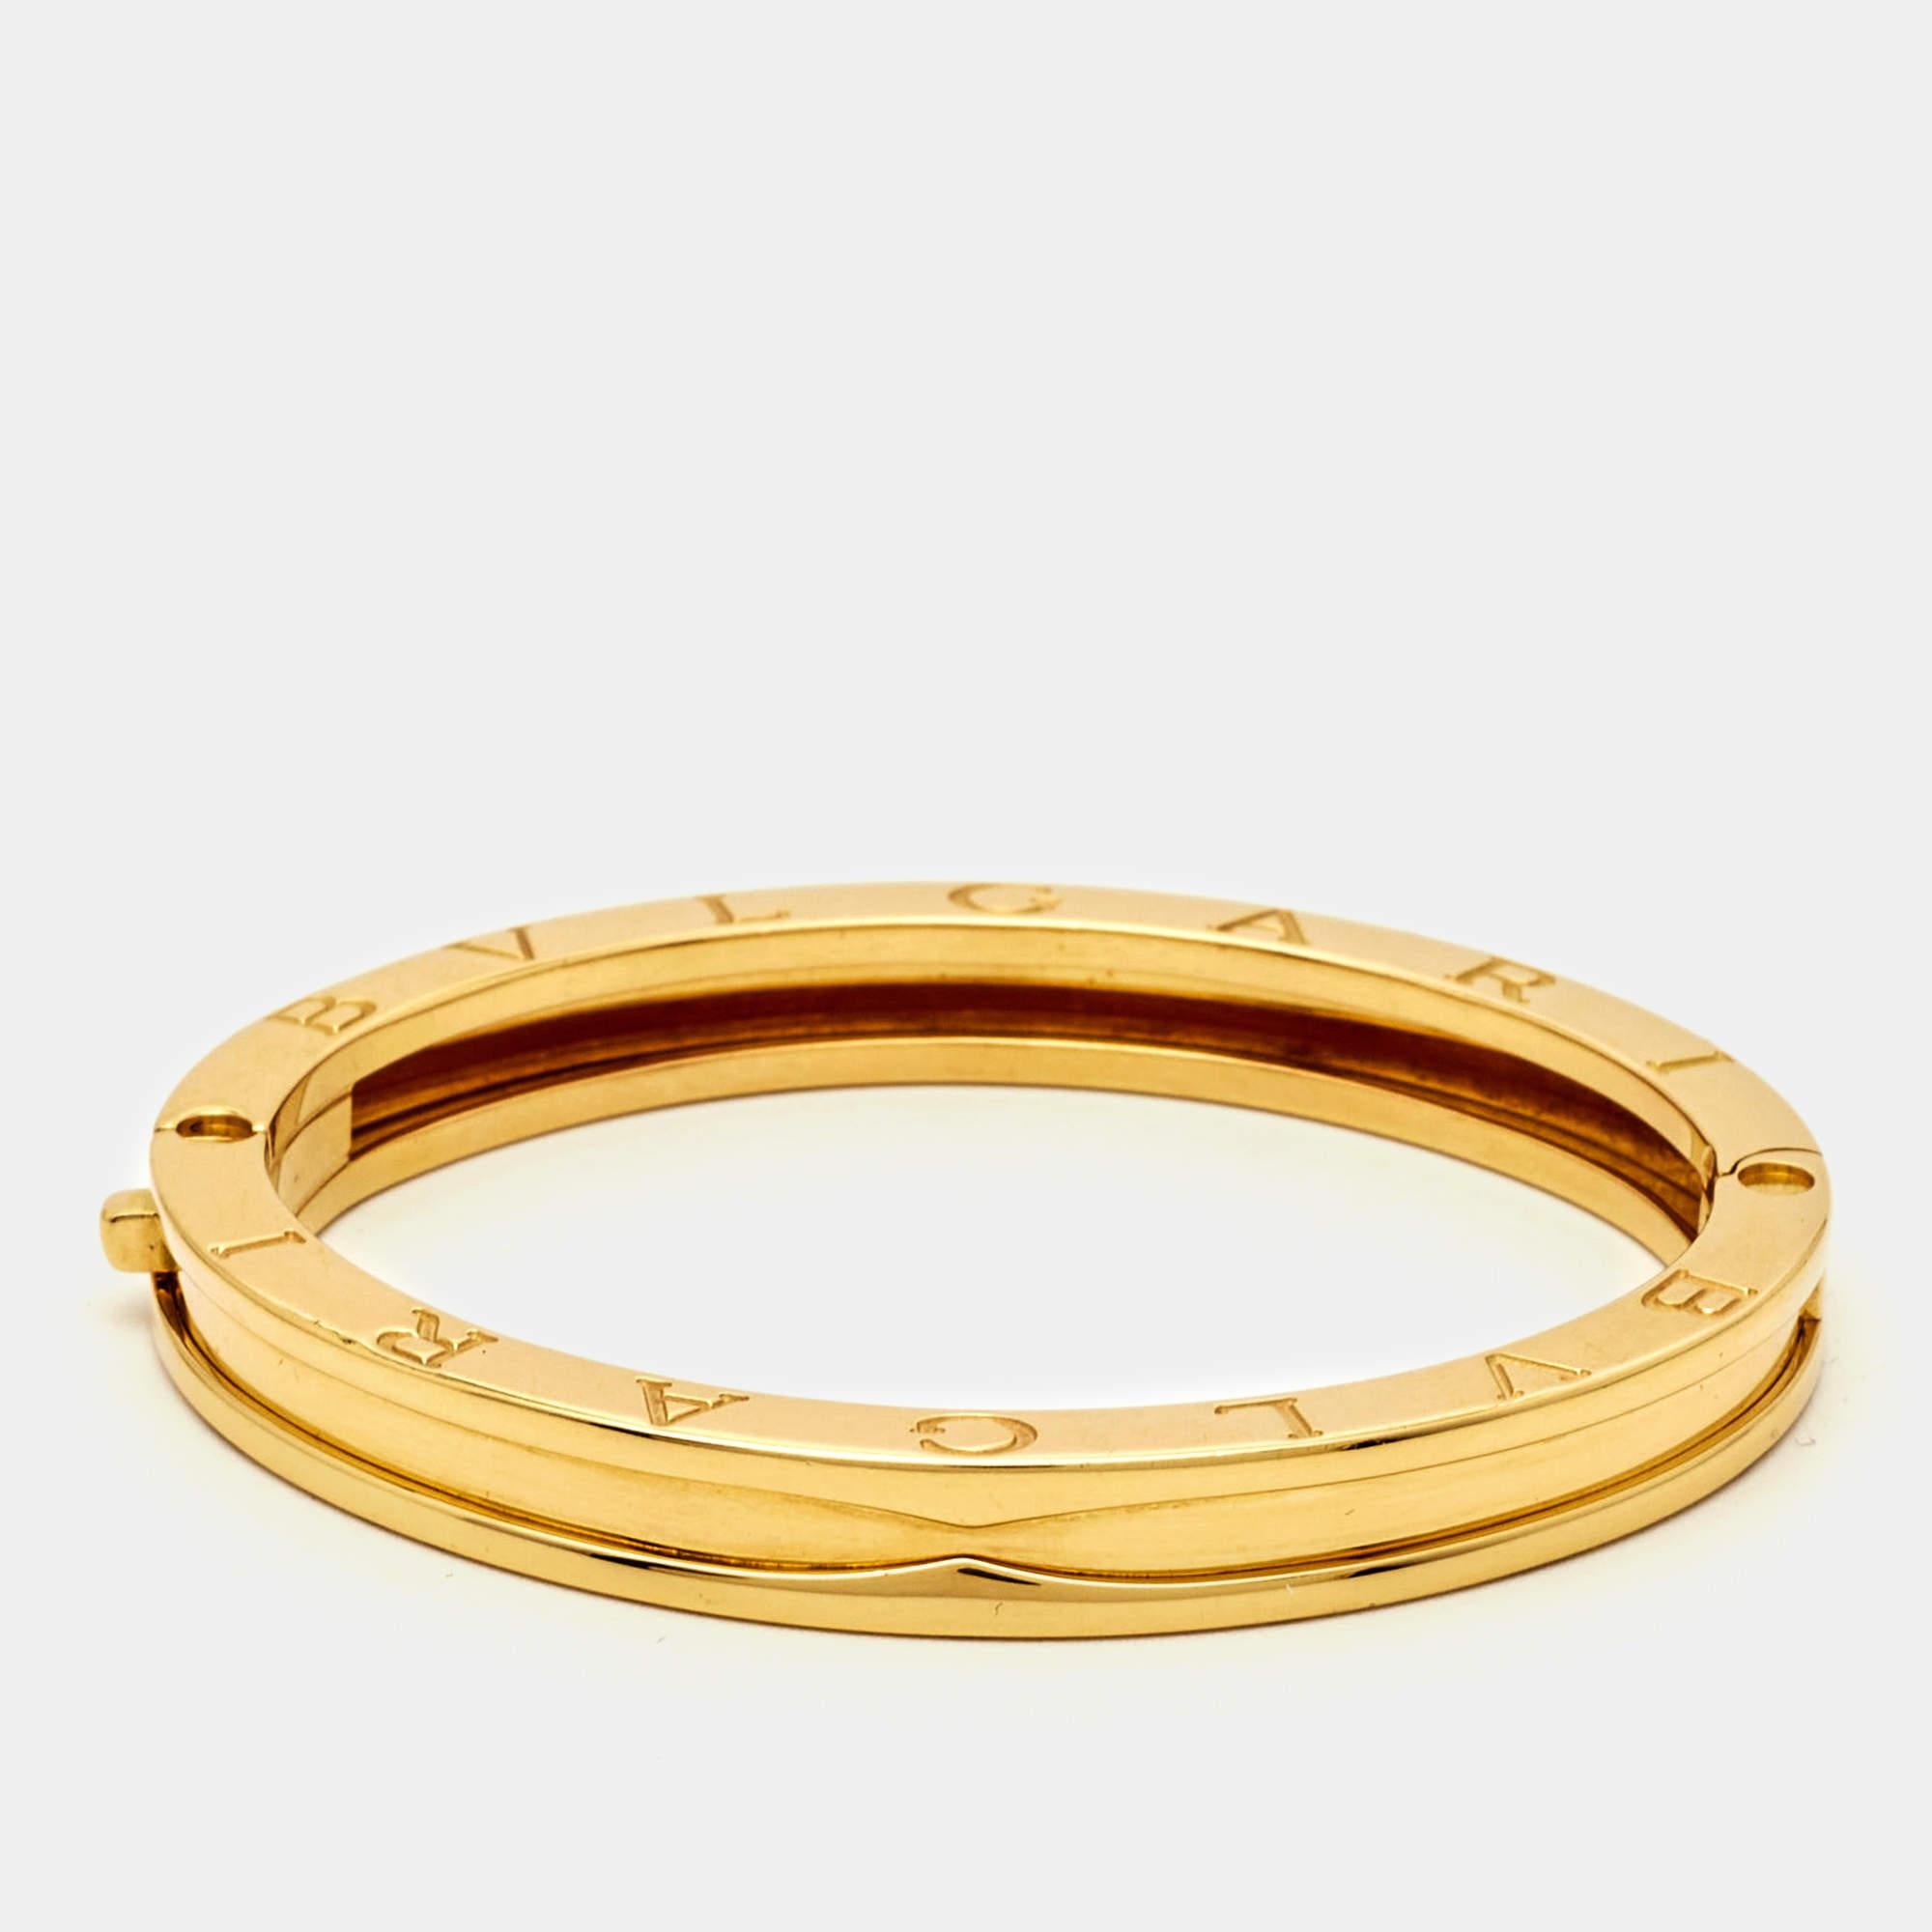 Bvlgari brings this fabulous bracelet rendered in an elegant silhouette for the woman who is ready to ace every accessory game. It is sure to catch an eye and make your heart skip a beat. Flaunt it with your all looks, from formal to